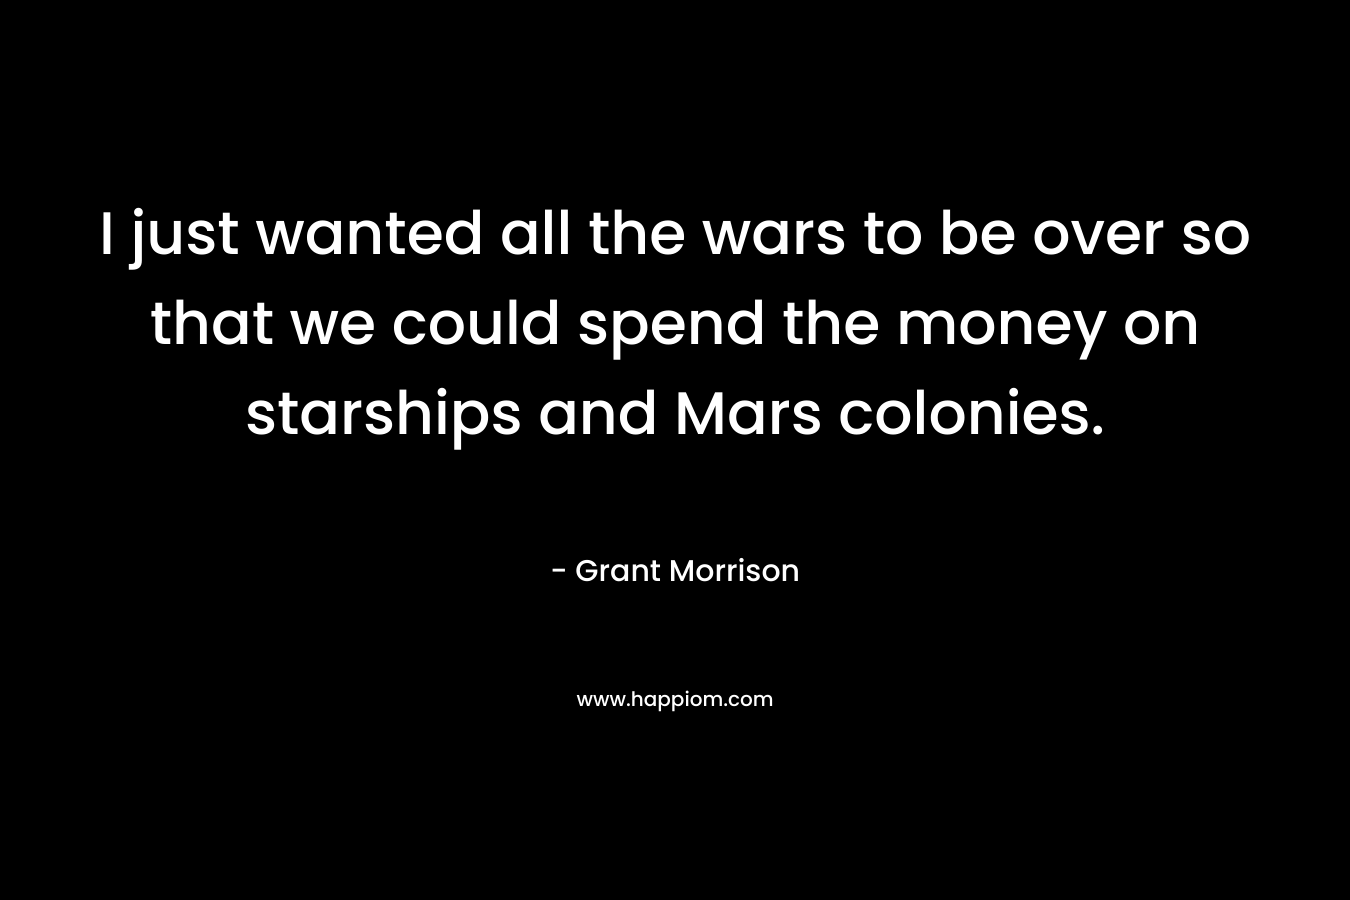 I just wanted all the wars to be over so that we could spend the money on starships and Mars colonies. – Grant Morrison